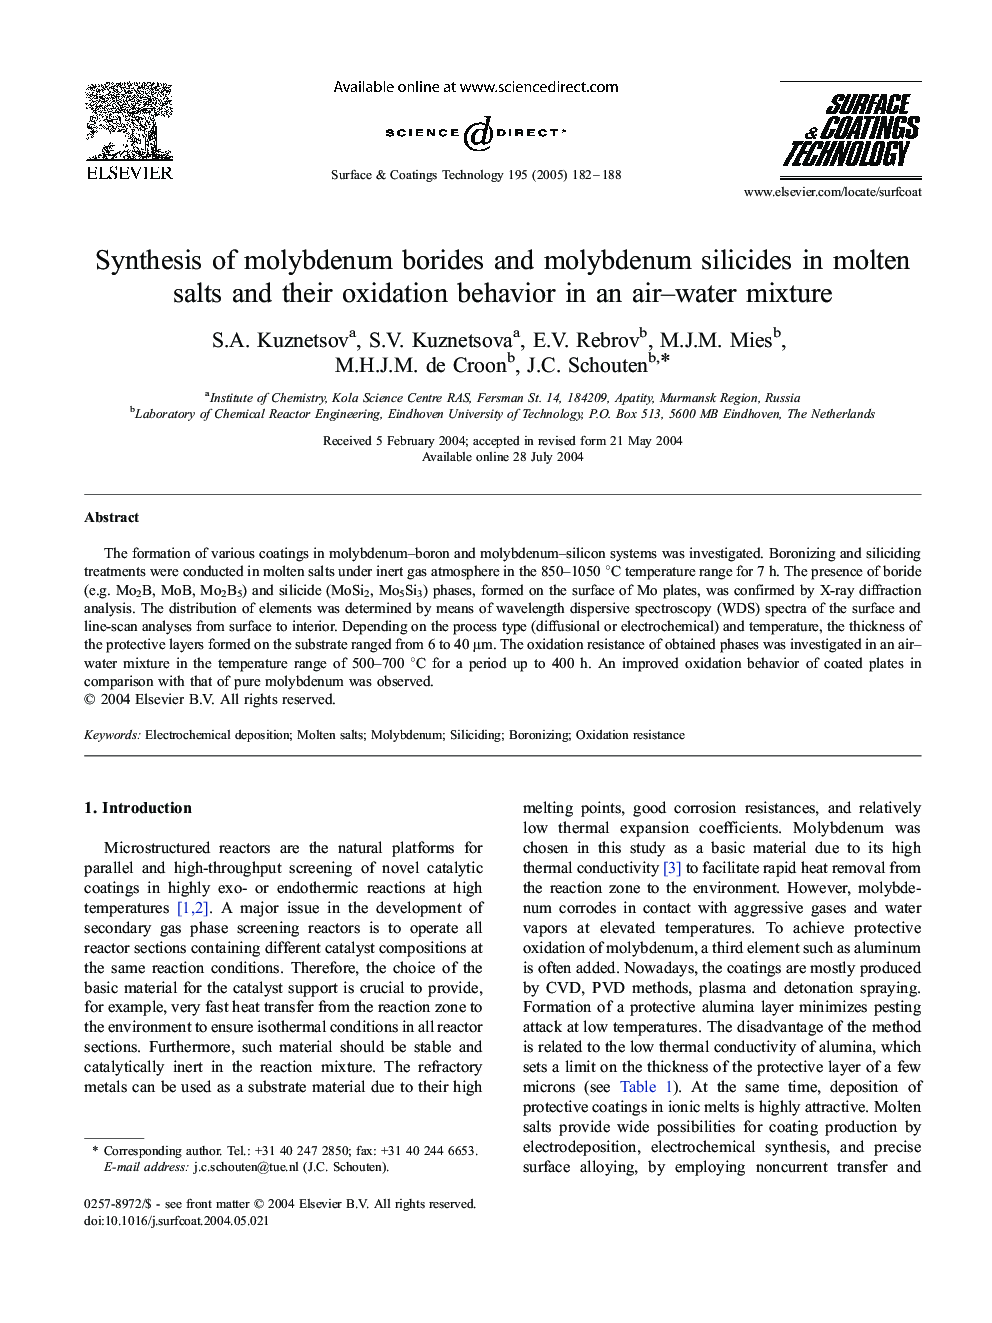 Synthesis of molybdenum borides and molybdenum silicides in molten salts and their oxidation behavior in an air-water mixture